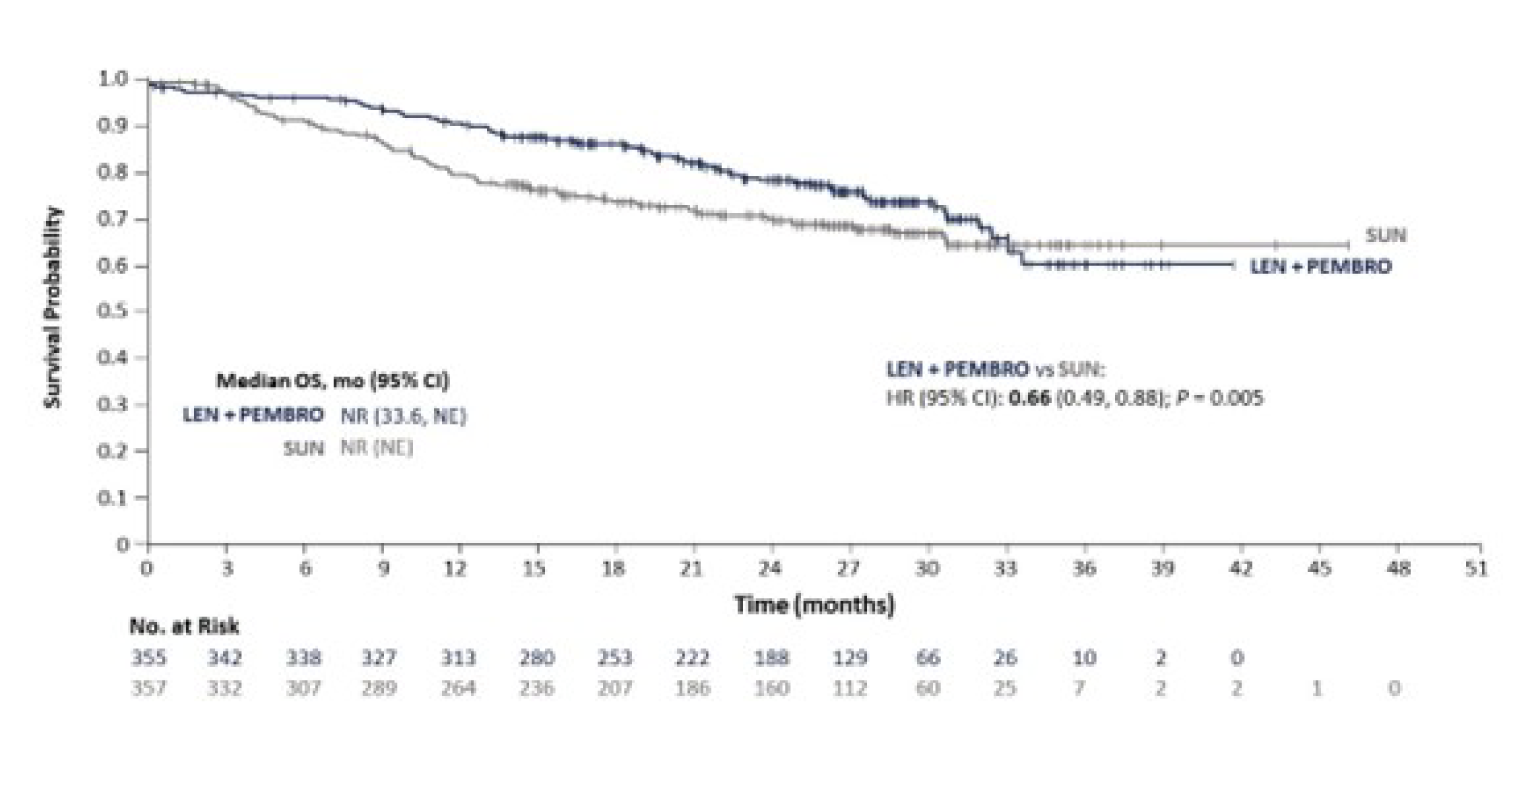 Graph of Kaplan-Meier analysis of overall survival for patients with renal cell carcinoma, the number of at-risk patients receiving LEN-PEM at 0, 3, 6, 9, 12, 15, 18, 21, 24, 27, 30, 33, 36, 39, and 42 months was 355, 342, 338, 327, 313, 280, 253, 222, 188, 129, 66, 26, 10, 2, and 0 months, respectively. The number of at-risk patients receiving SUN arm at 0, 3, 6, 9, 12, 15, 18, 21, 24, 27, 30, 33, 36, 39, 42, 45, and 48 months was 357, 332, 307, 289, 264, 236, 207, 186, 160, 112, 60, 25, 7, 2, 2, 1, and 0, respectively. The separation of the Kaplan-Meier curves is not maintained over time. The curve crosses over at 33 months.